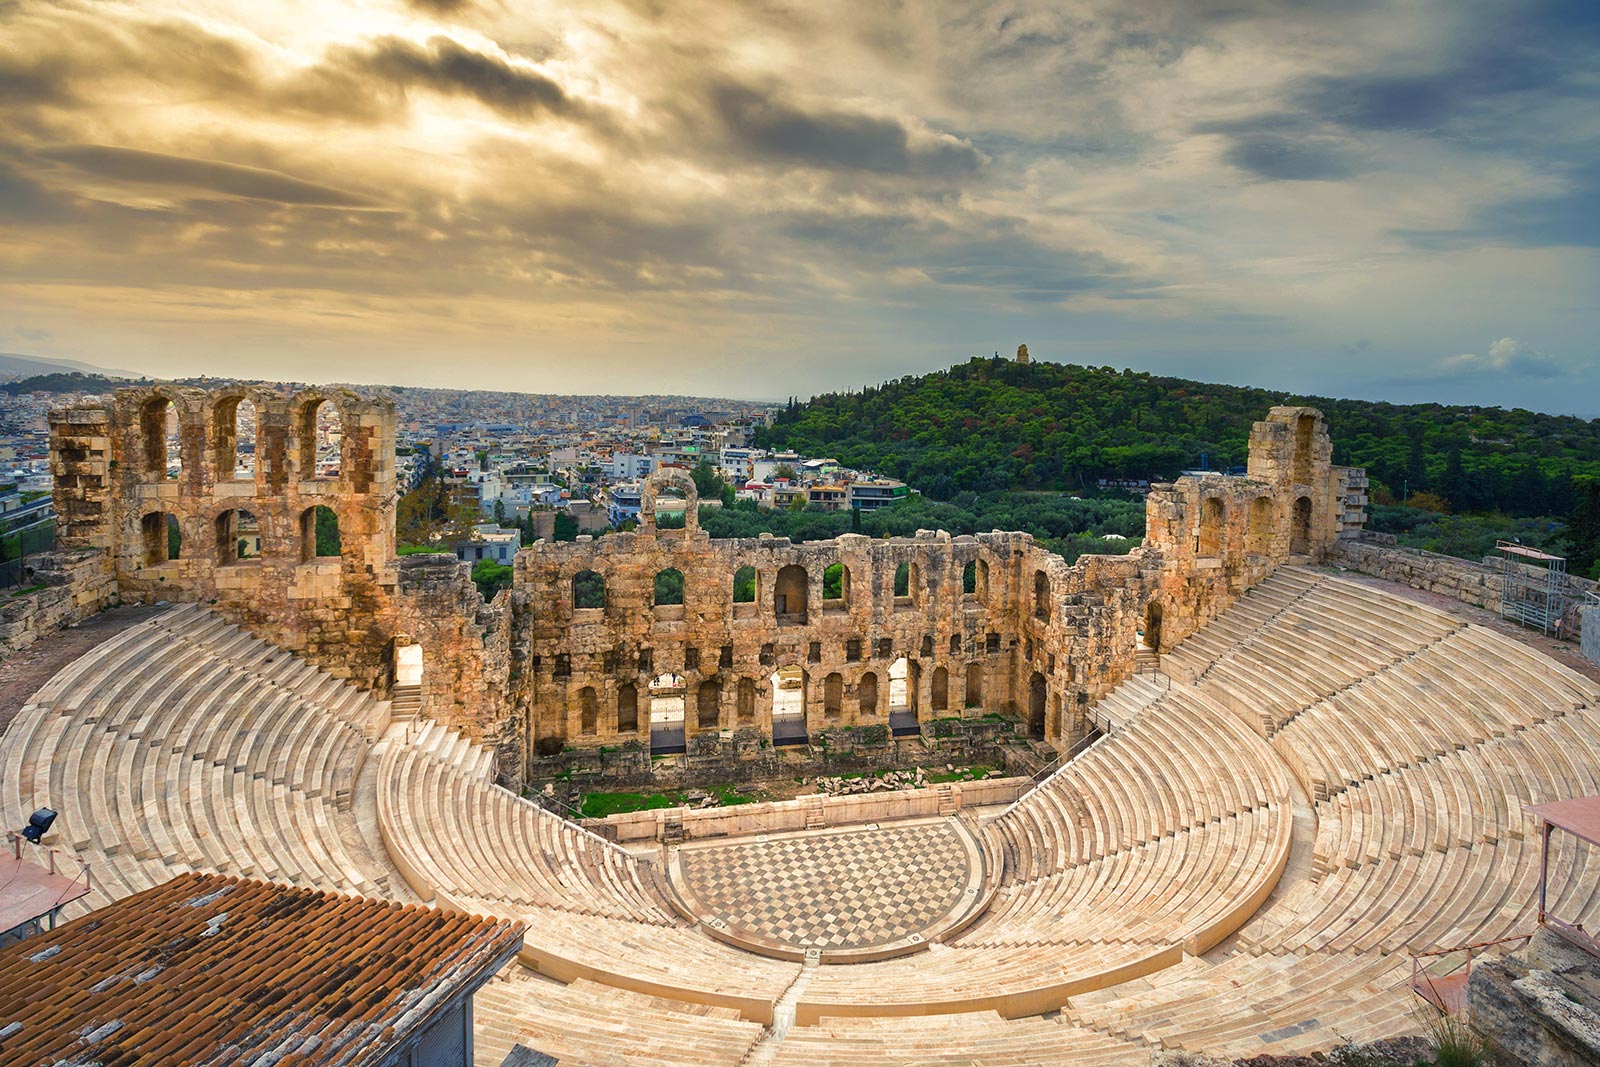 The theater of Herodion Atticus under the ruins of Acropolis, Athens during sunset. 10 things you must do in Athens